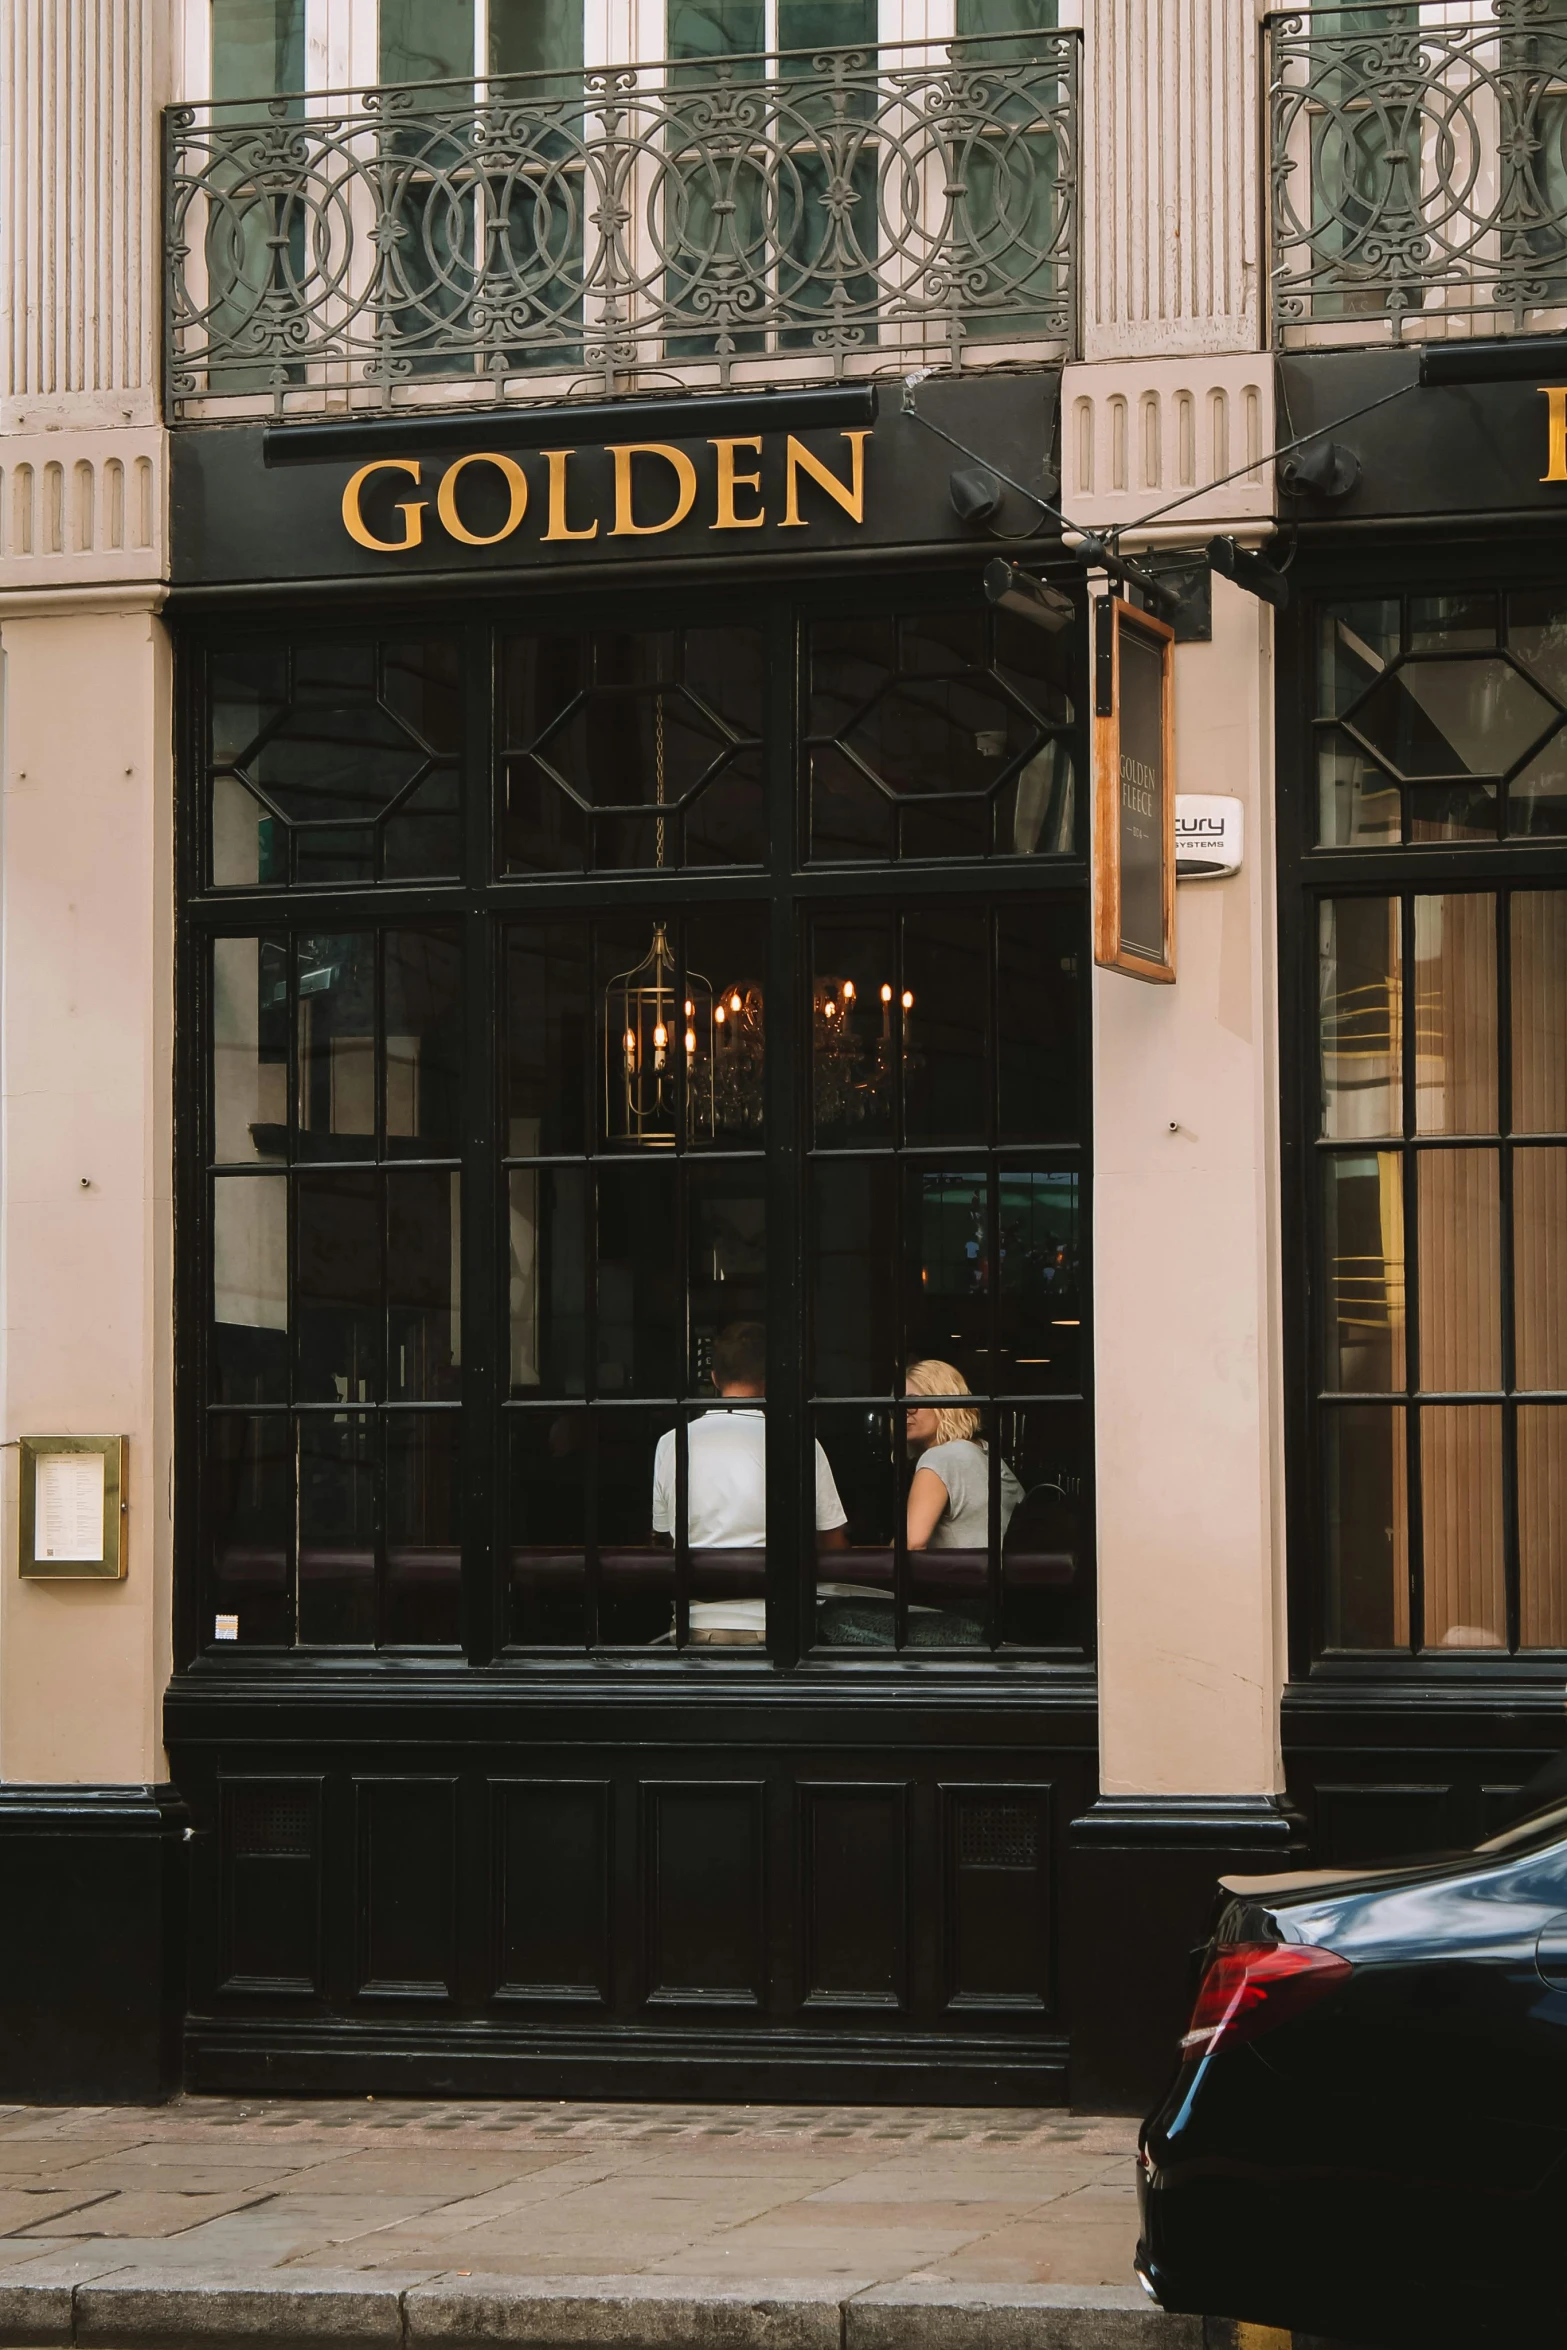 the outside view of a store called golden